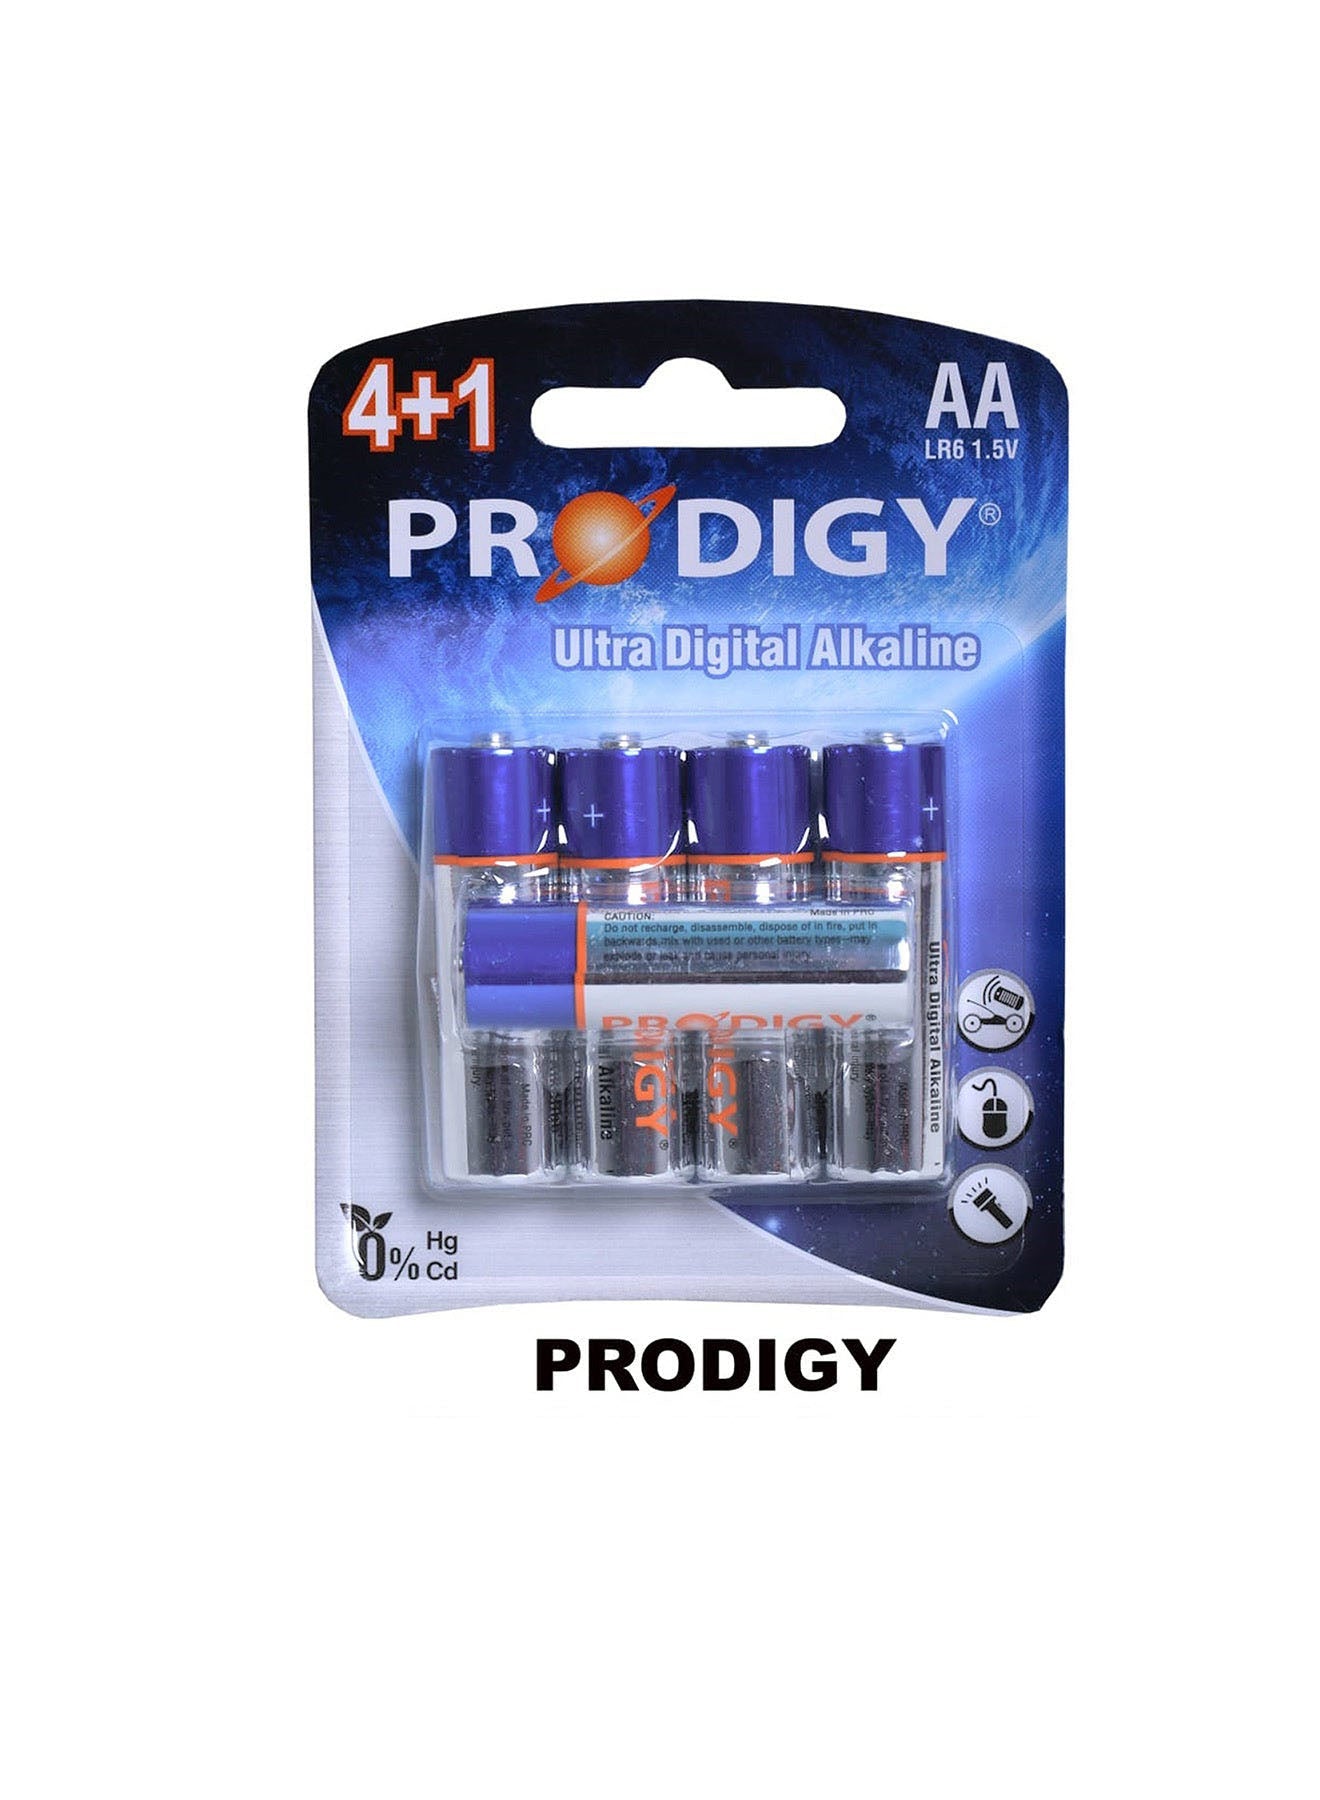 Prodigy Alkaline LR6UD 41B AA5 Value Pack of 2 